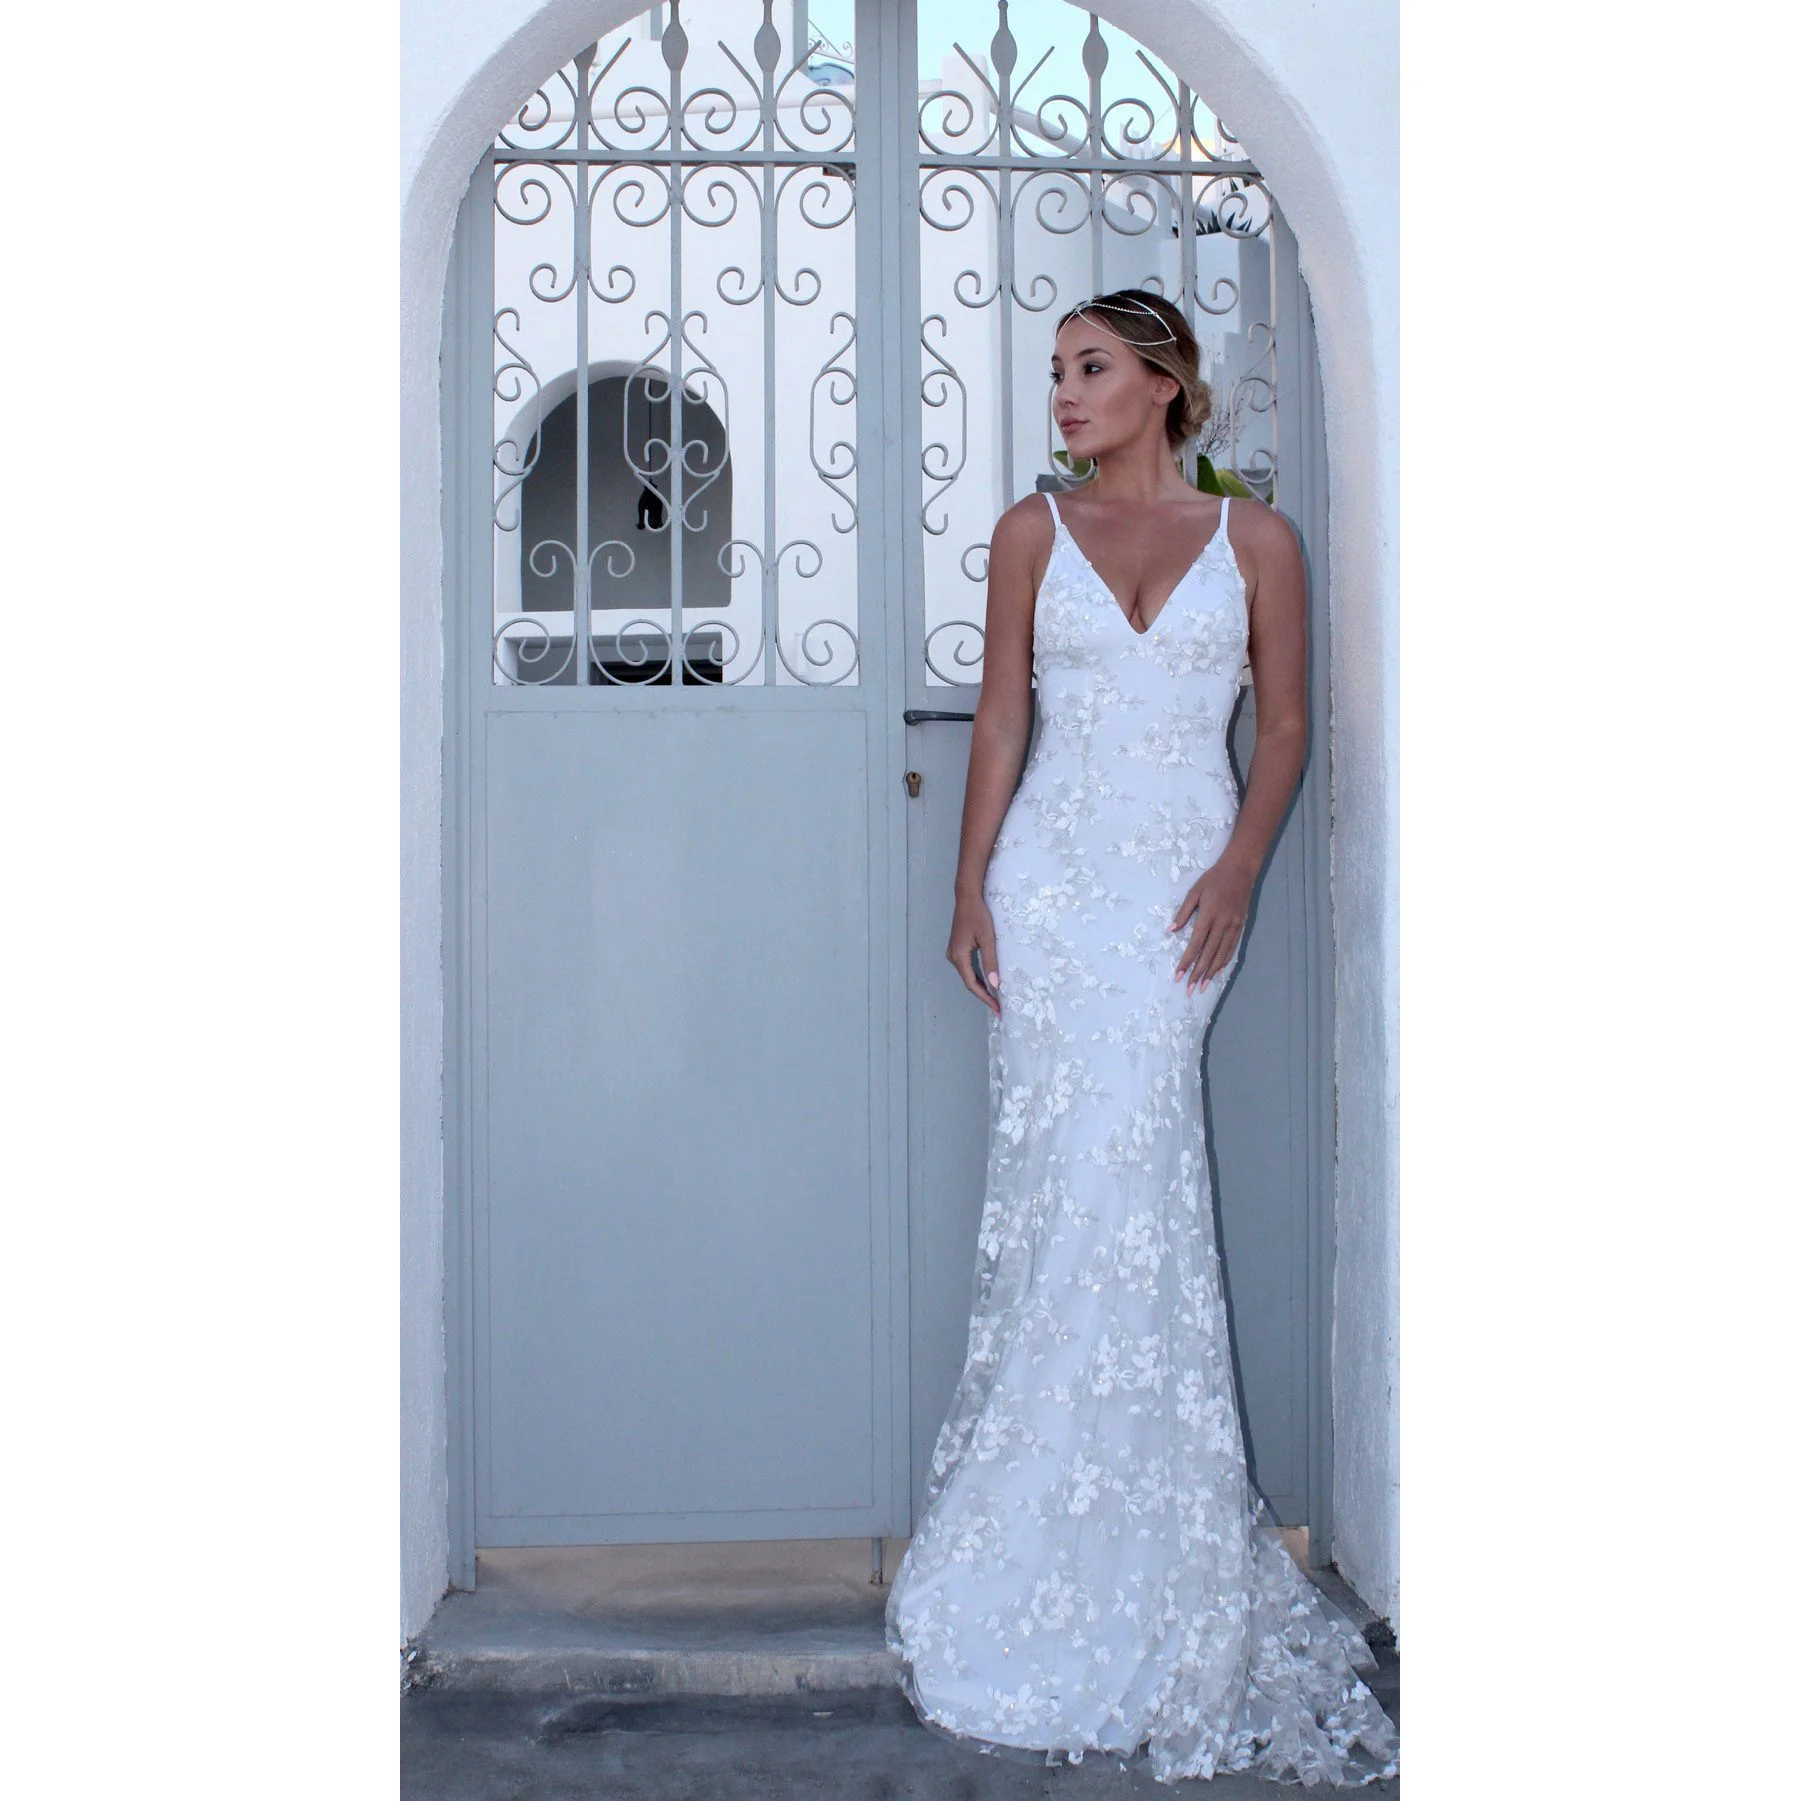 

Gauze Embroidered Backless Lace Up Gown Fishtail Wedding Dress, White